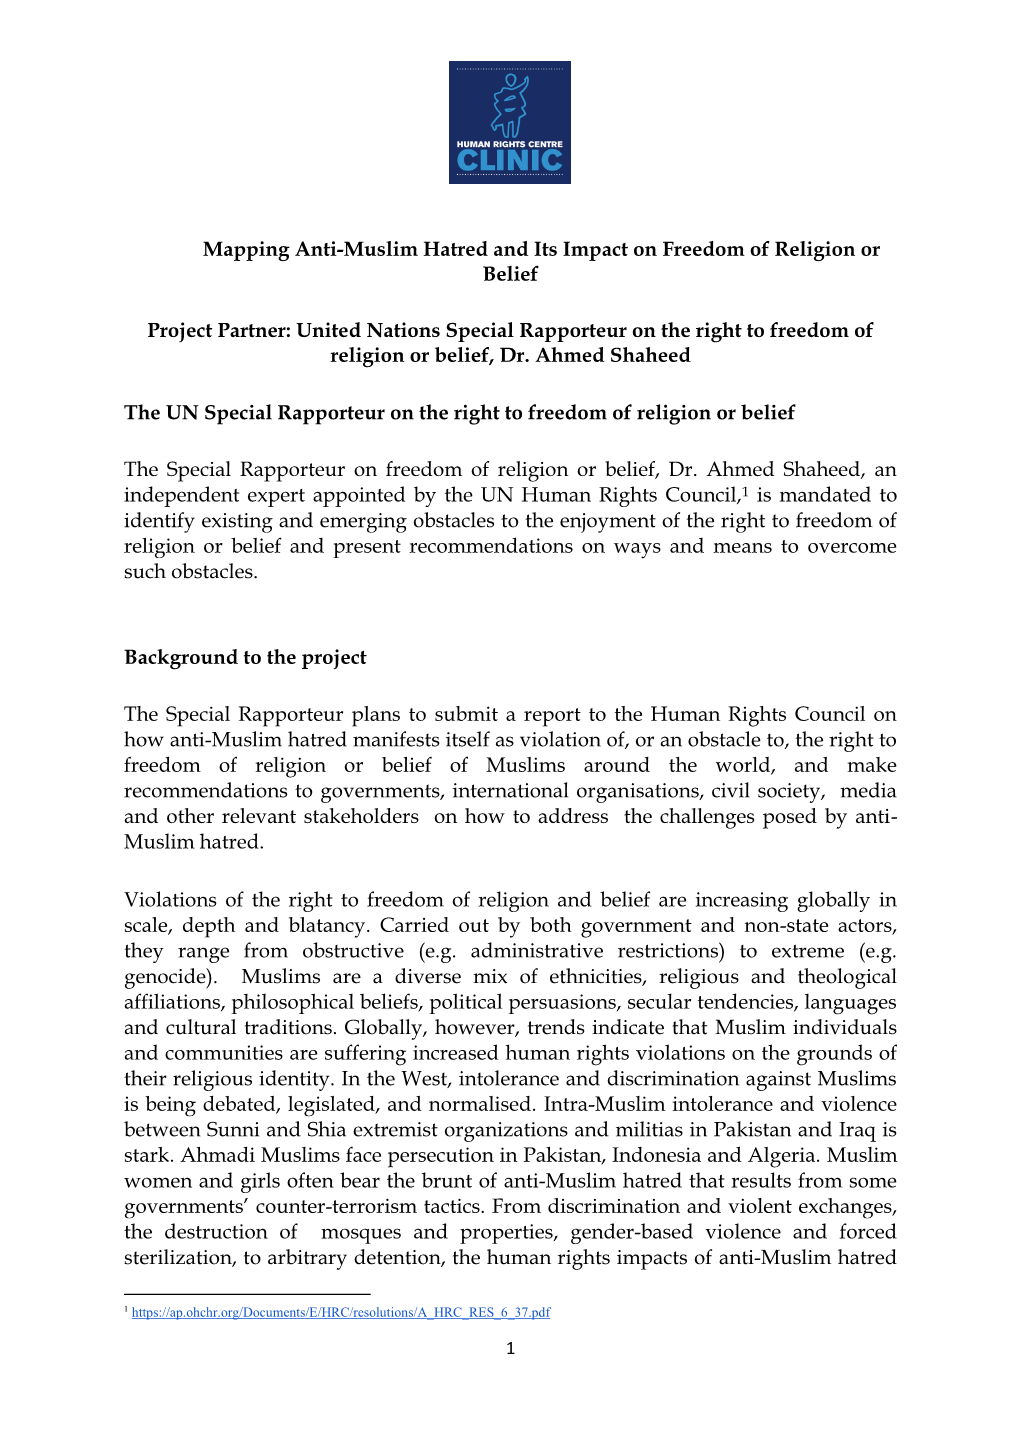 Mapping Anti-Muslim Hatred and Its Impact on Freedom of Religion Or Belief Project Partner: United Nations Special Rapporteur On